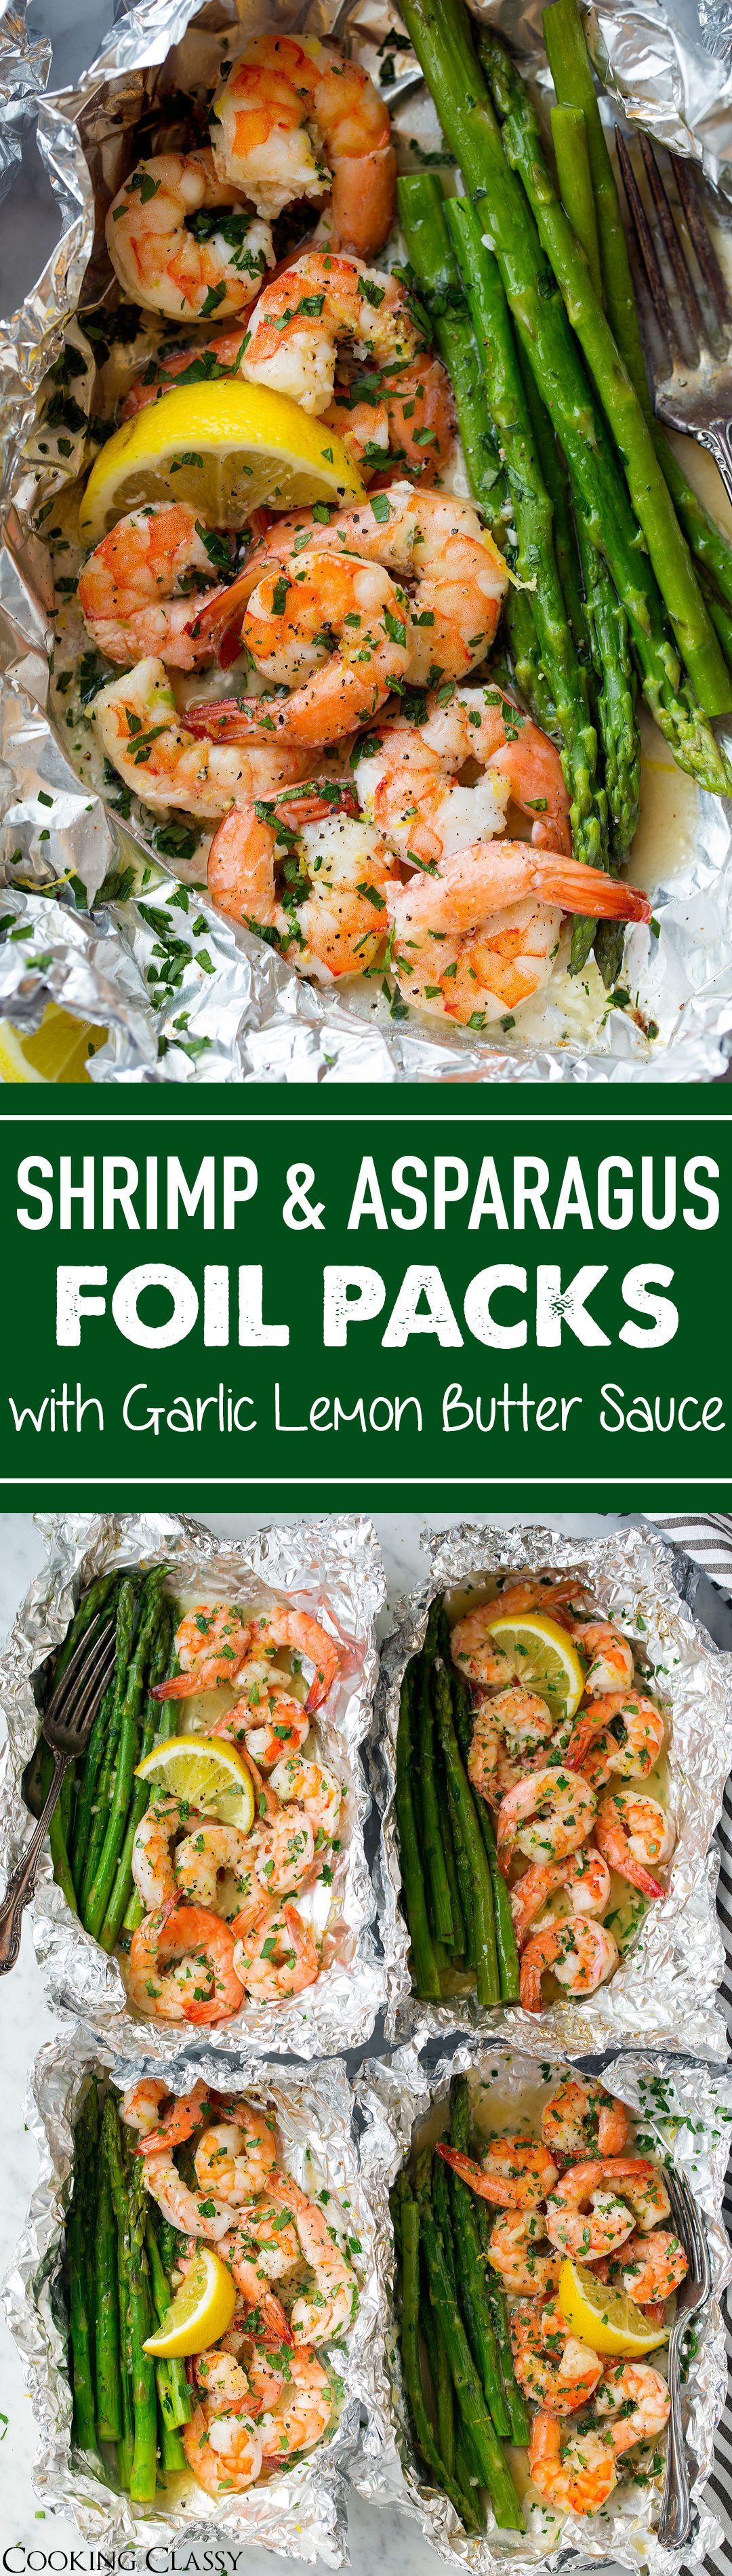 Shrimp and Asparagus Foil Packs with Garlic Lemon Butter Sauce – Cooking Classy